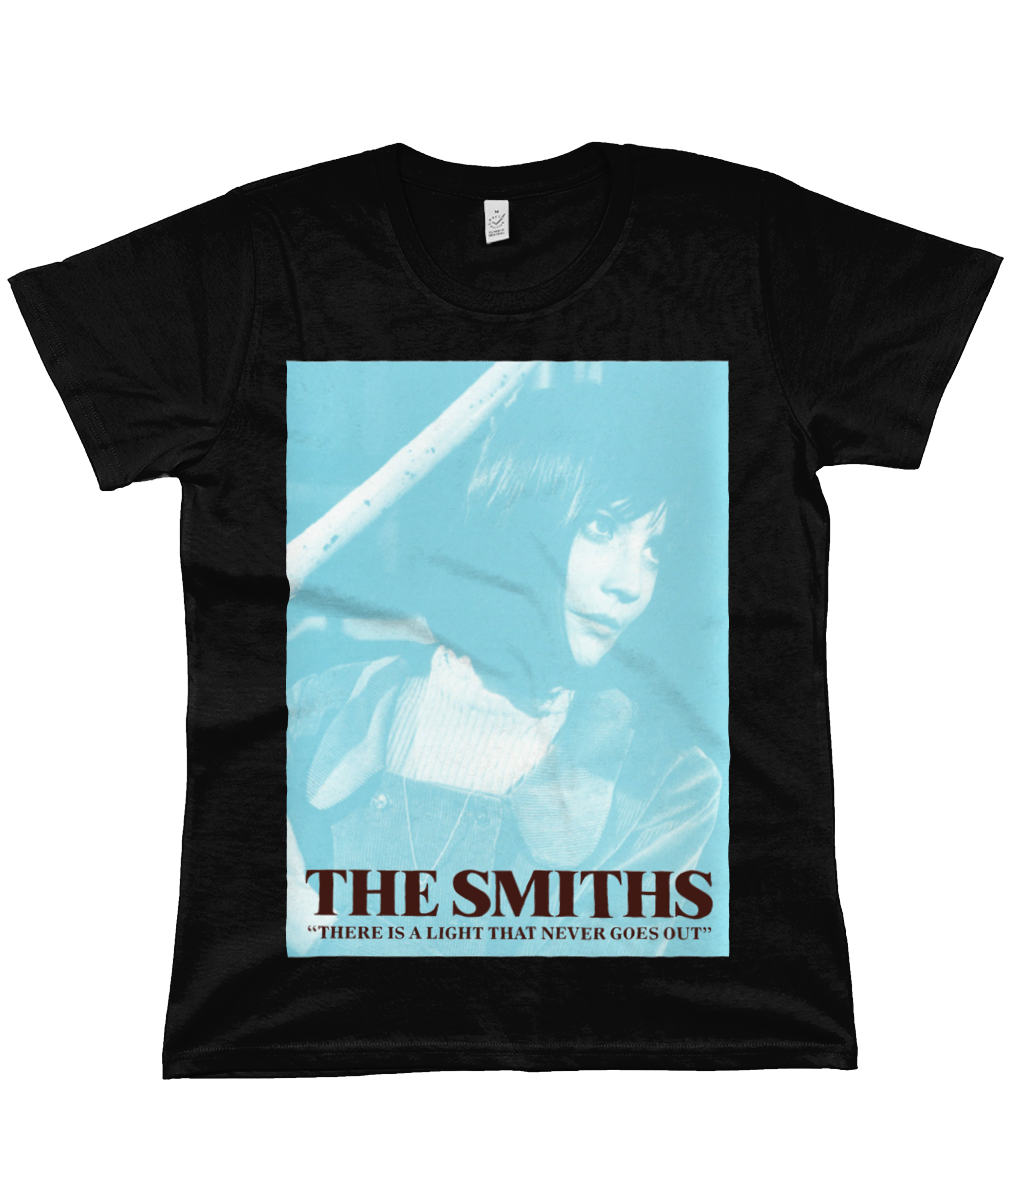 THE SMITHS - THERE IS A LIGHT THAT NEVER GOES OUT - 1992 - Women's T Shirt